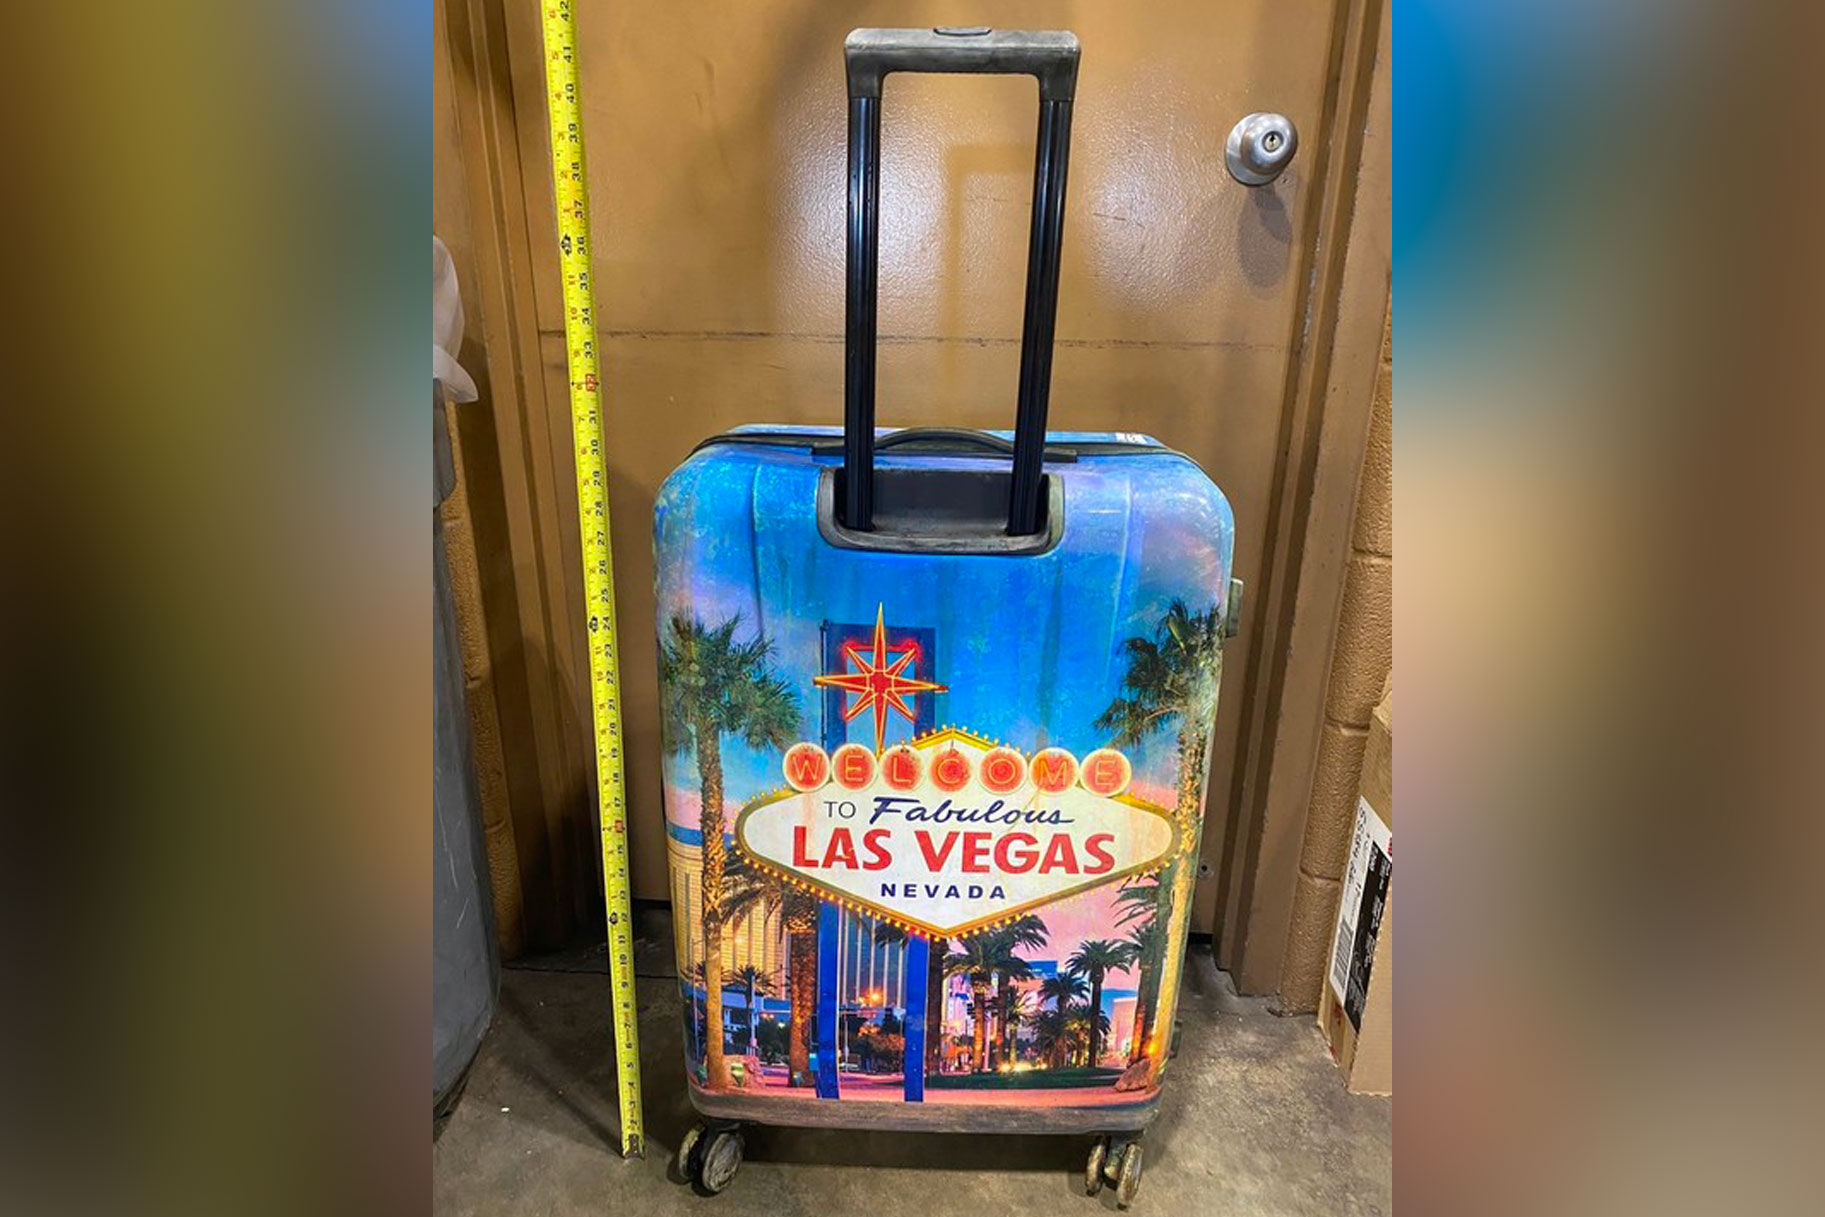 A photo of the Las Vegas Luggage where the boy's body was found